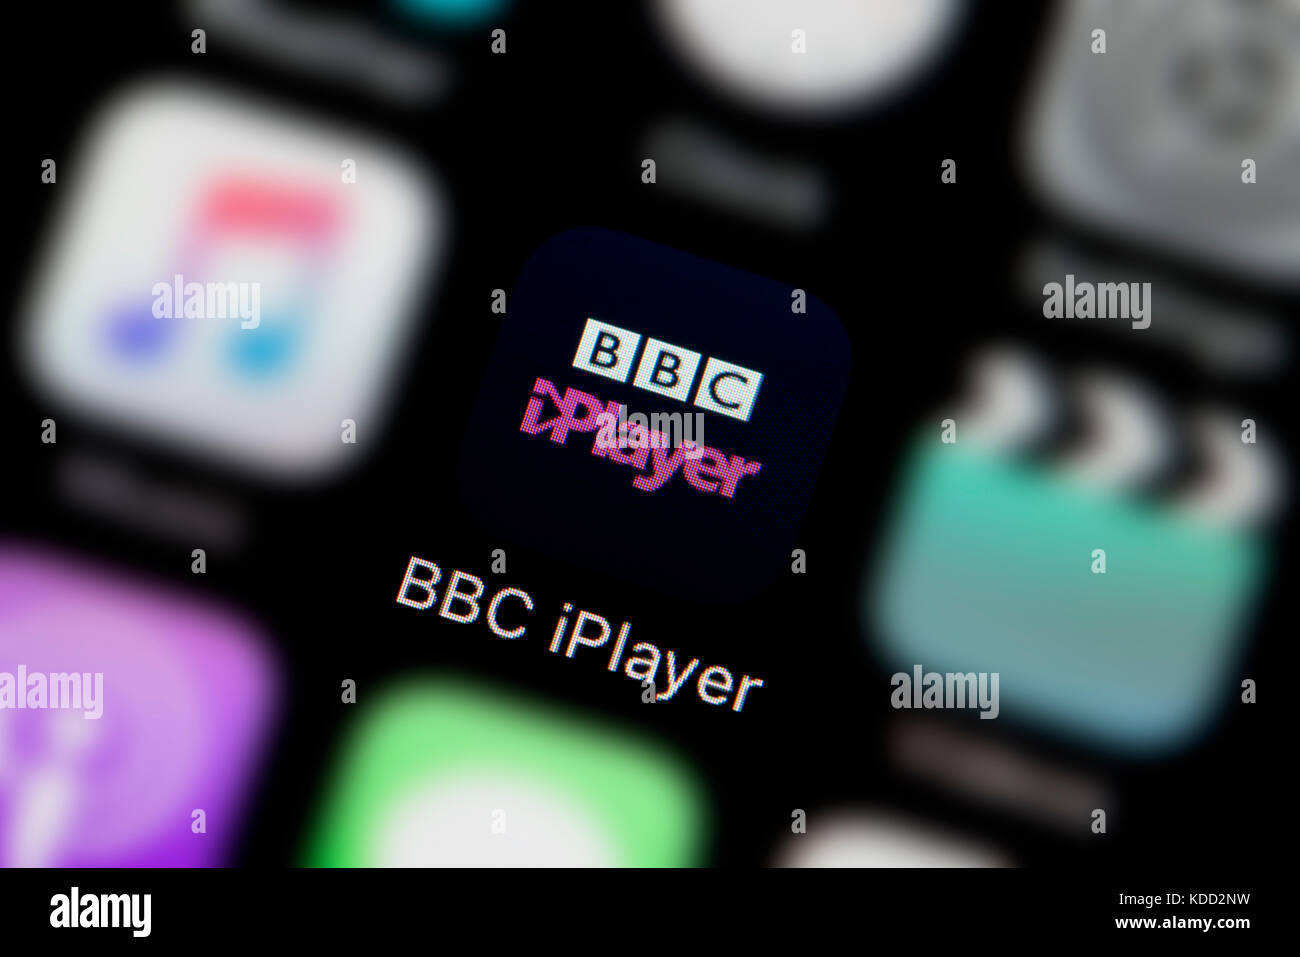 A close-up shot of the logo representing BBC iPlayer app icon, as seen on the screen of a smart phone (Editorial use only) Stock Photo